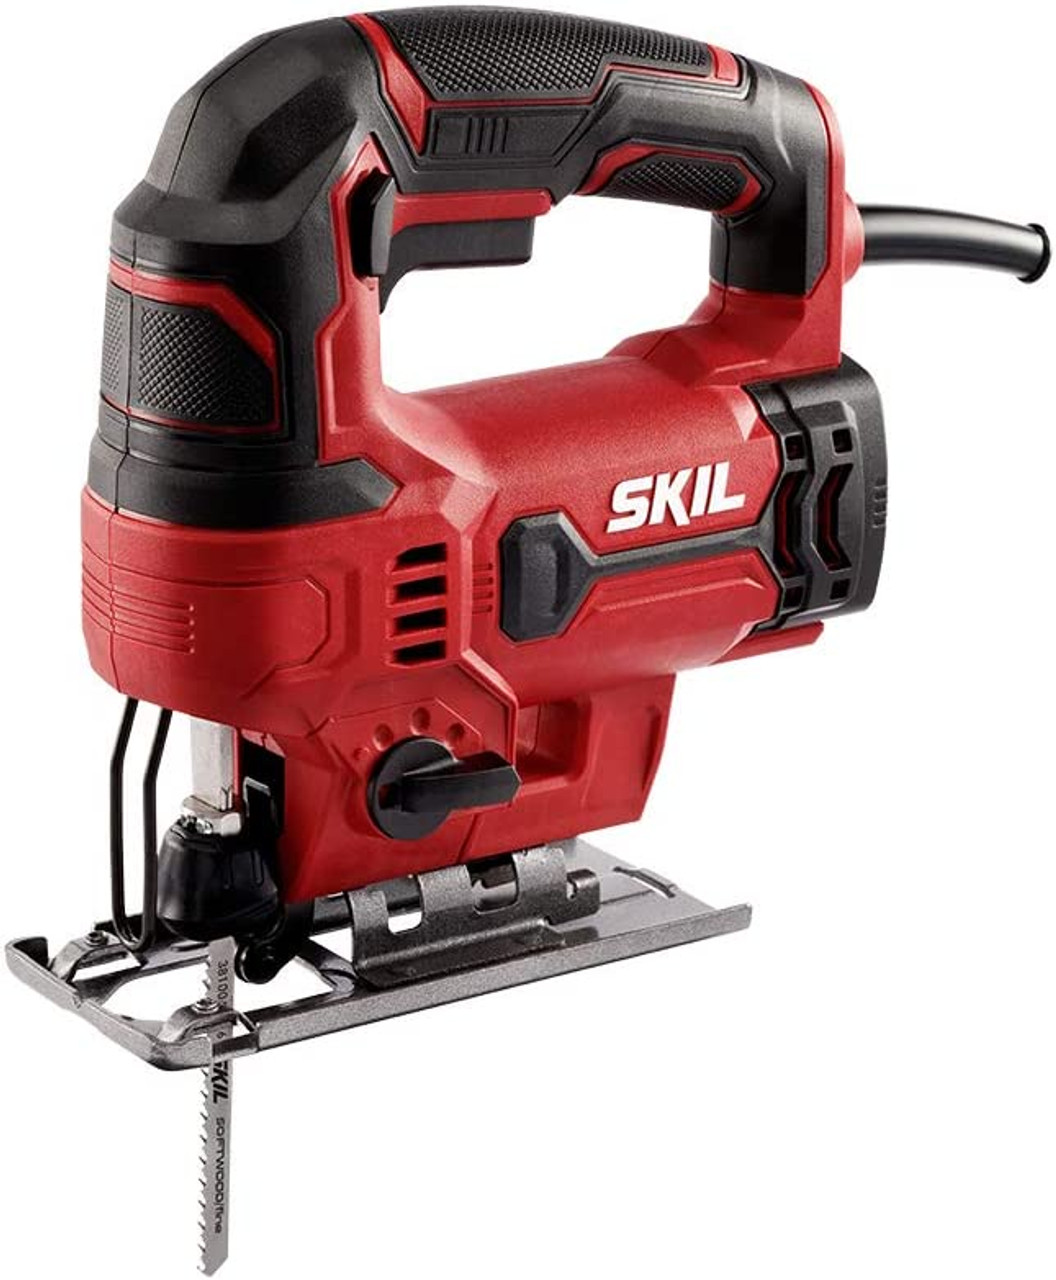 Skil JS313101 Variable Speed Corded Jig Saw, Red, 5-Amp JB Tools